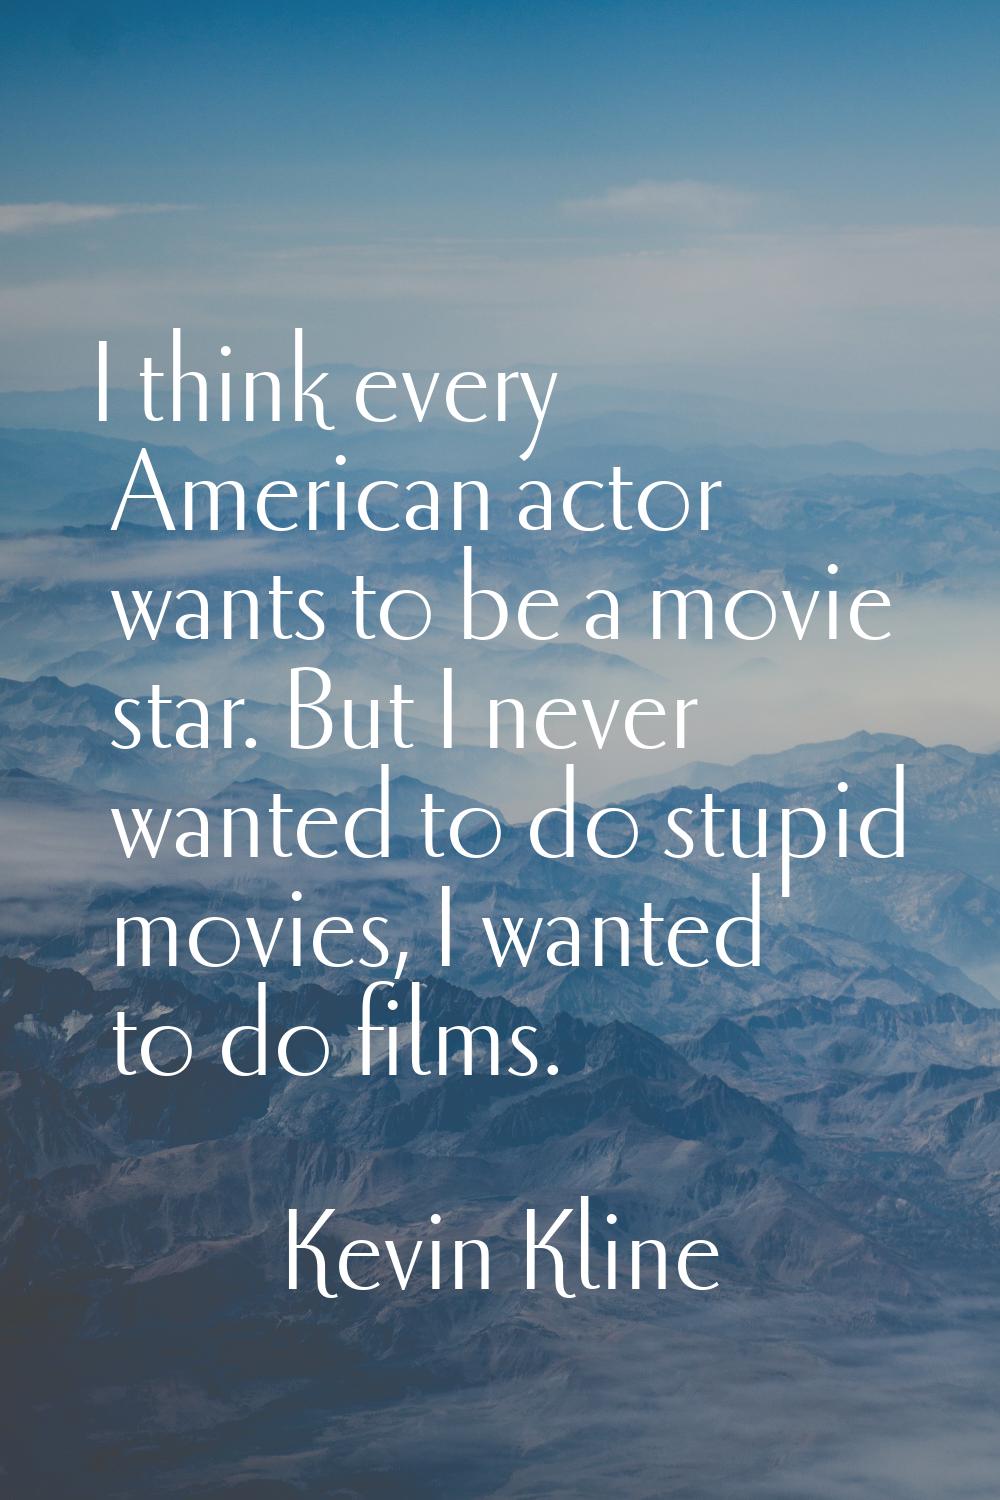 I think every American actor wants to be a movie star. But I never wanted to do stupid movies, I wa